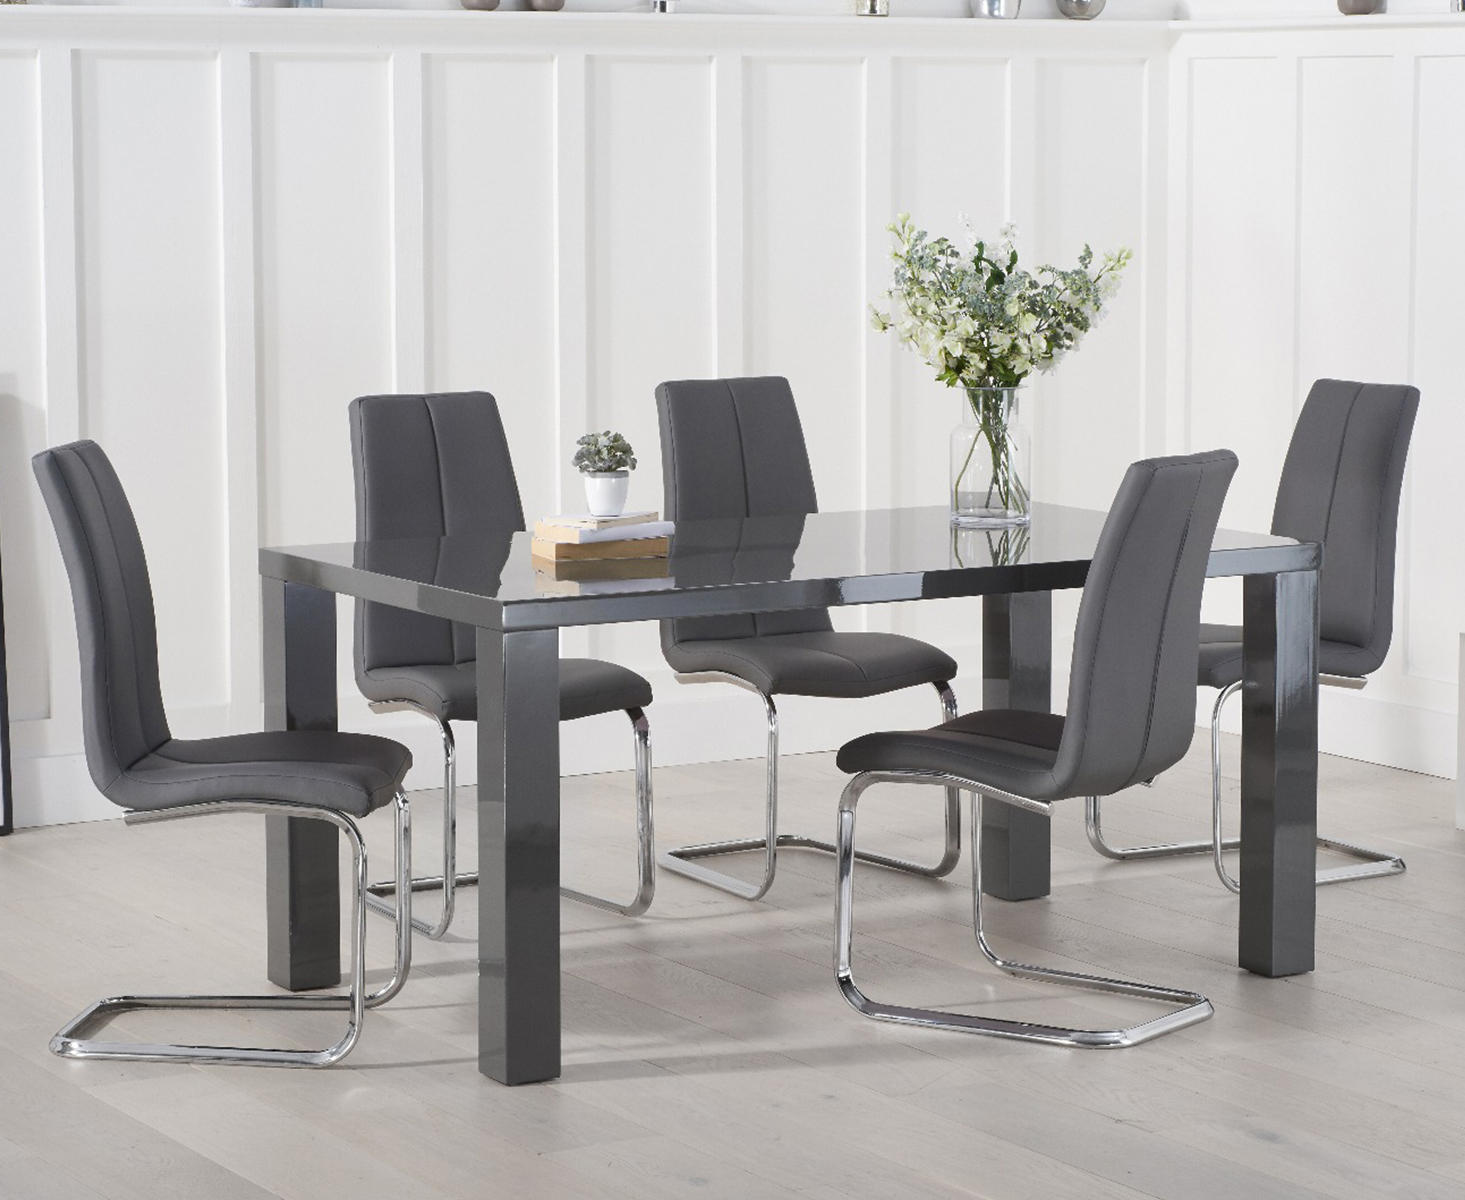 Seattle 160cm Dark Grey High Gloss Dining Table With 6 Grey Gianni Chairs